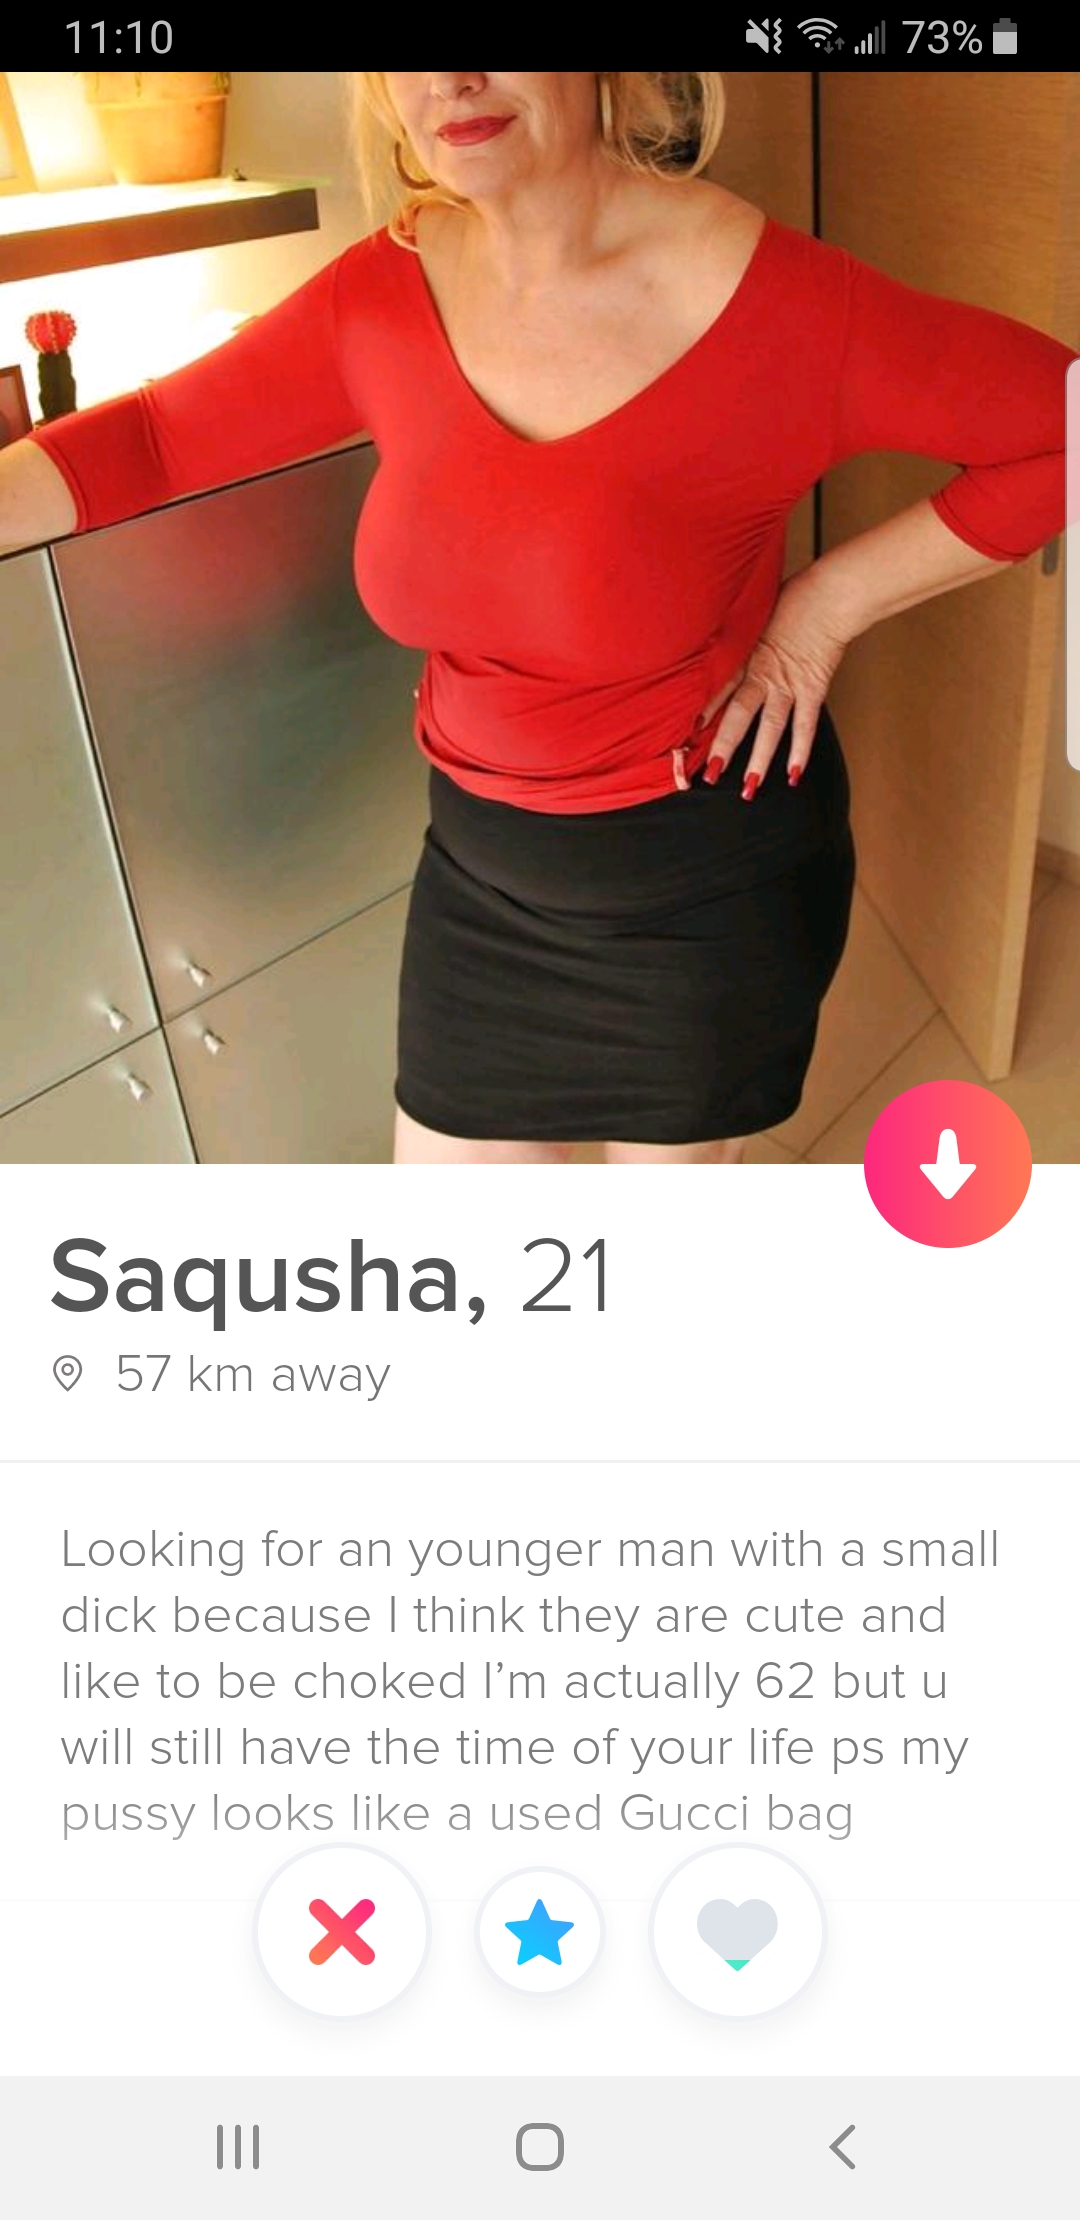 tinder - shoulder - 73% Saqusha, 21 57 km away Looking for an younger man with a small dick because I think they are cute and to be choked I'm actually 62 butu will still have the time of your life ps my pussy looks a used Gucci bag X